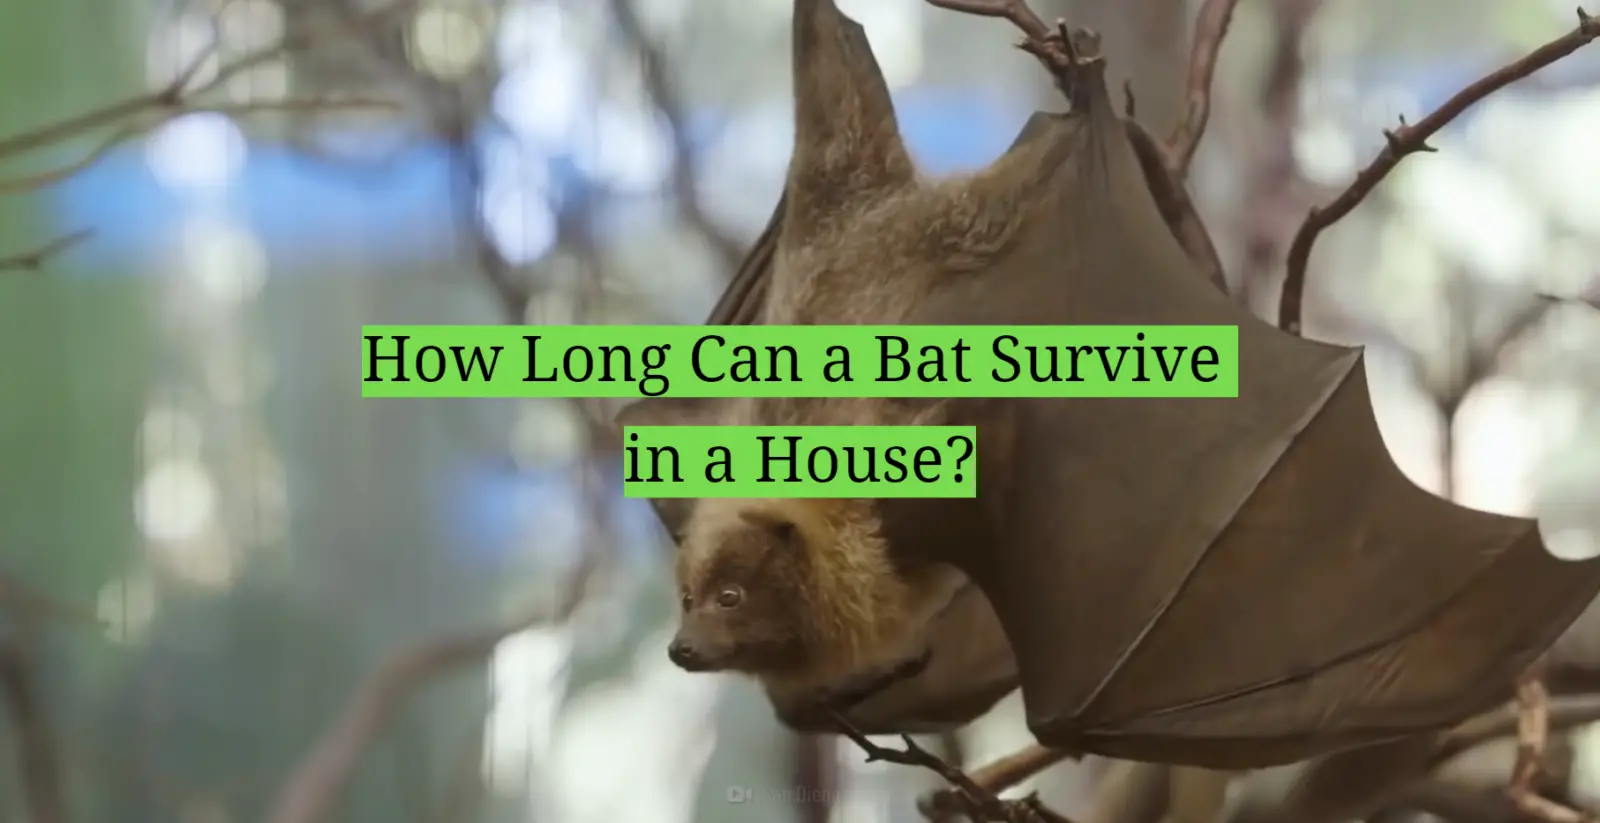 How Long Can a Bat Survive in a House?